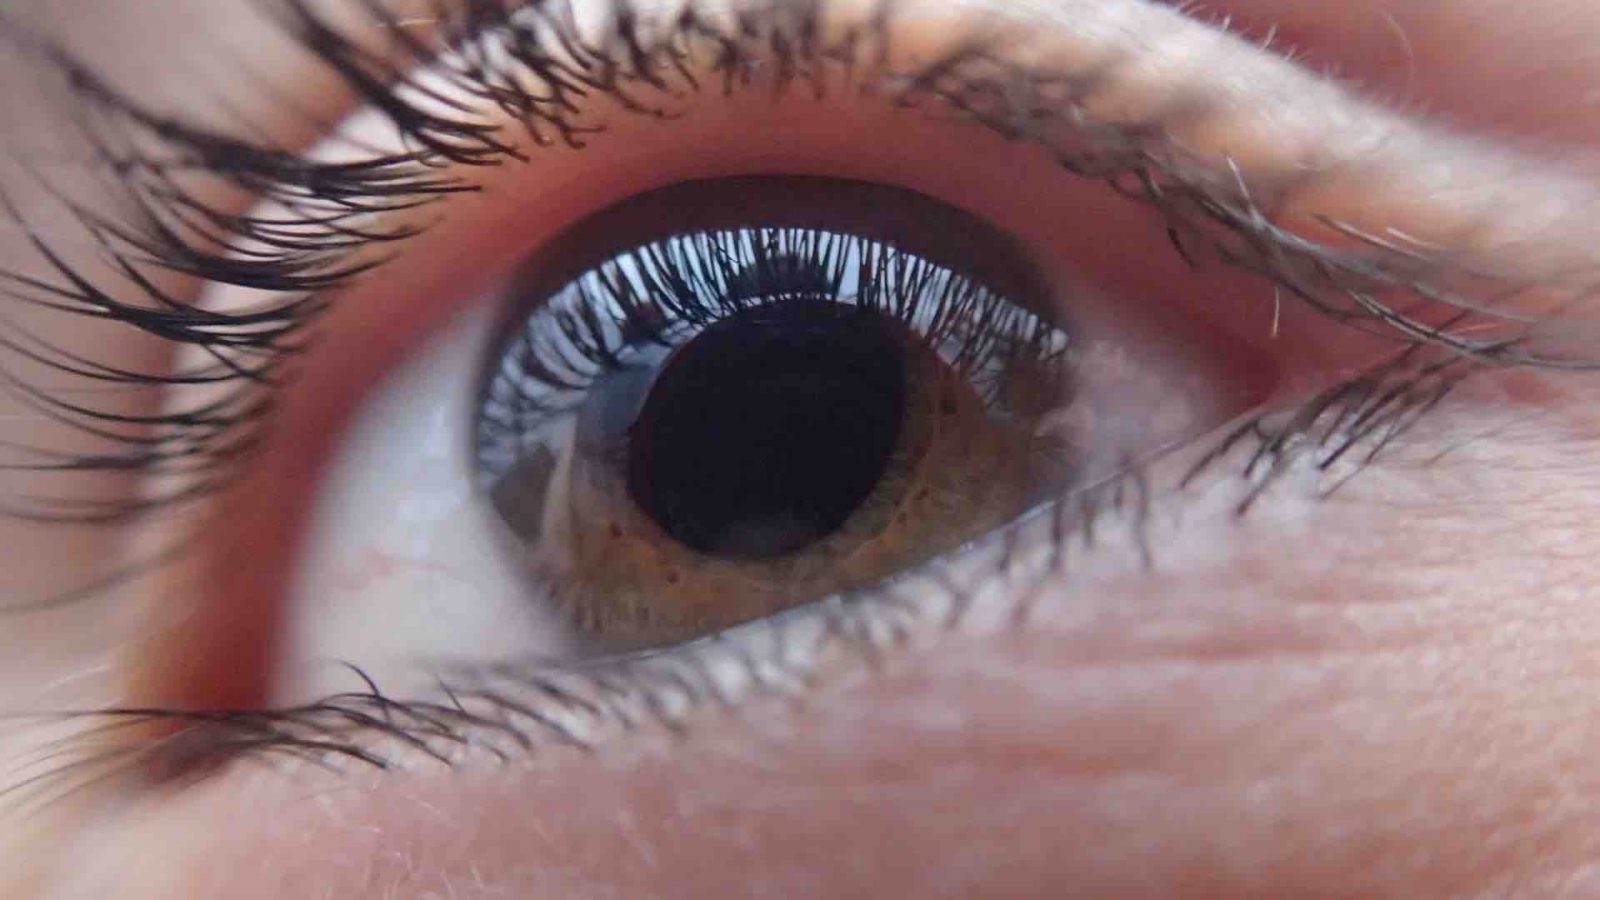 Close-up photo of a person's eye lens